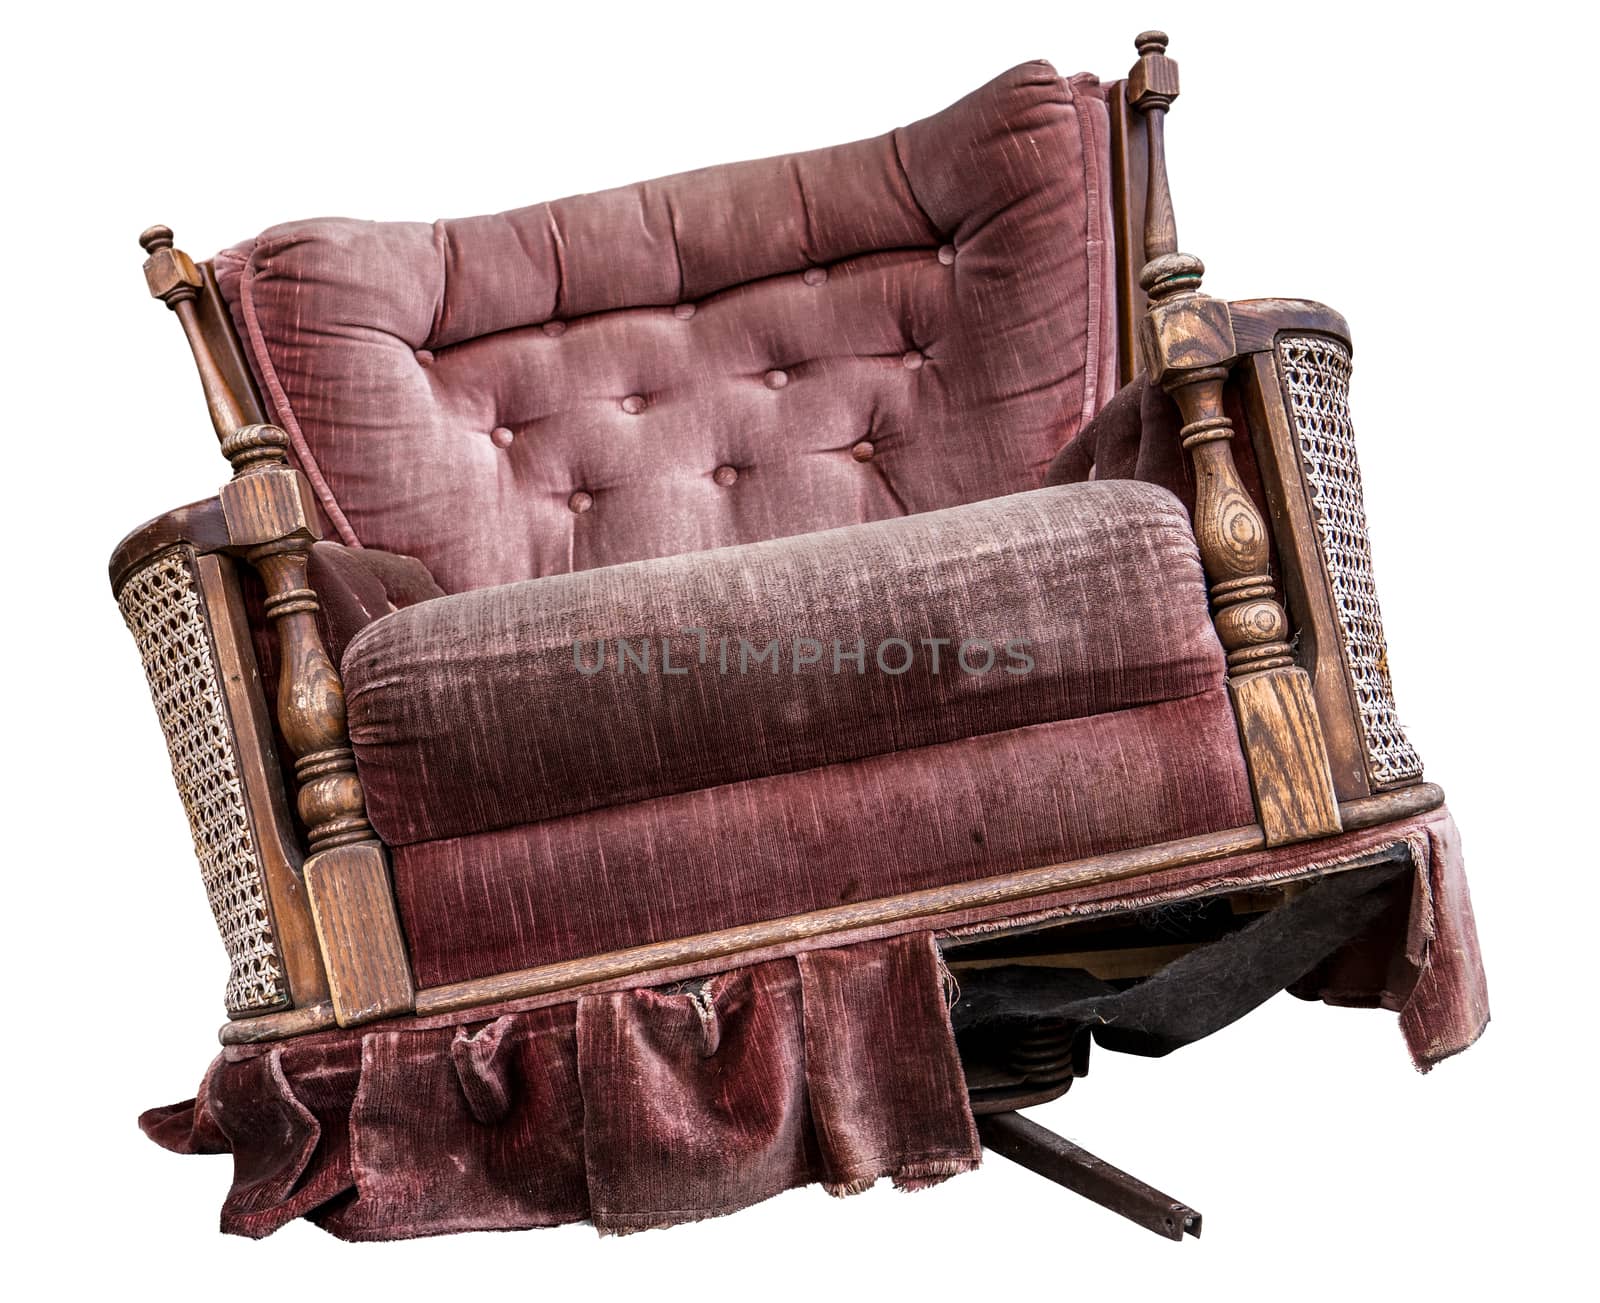 An Isolated Old Damaged Vintage Purple Armchair